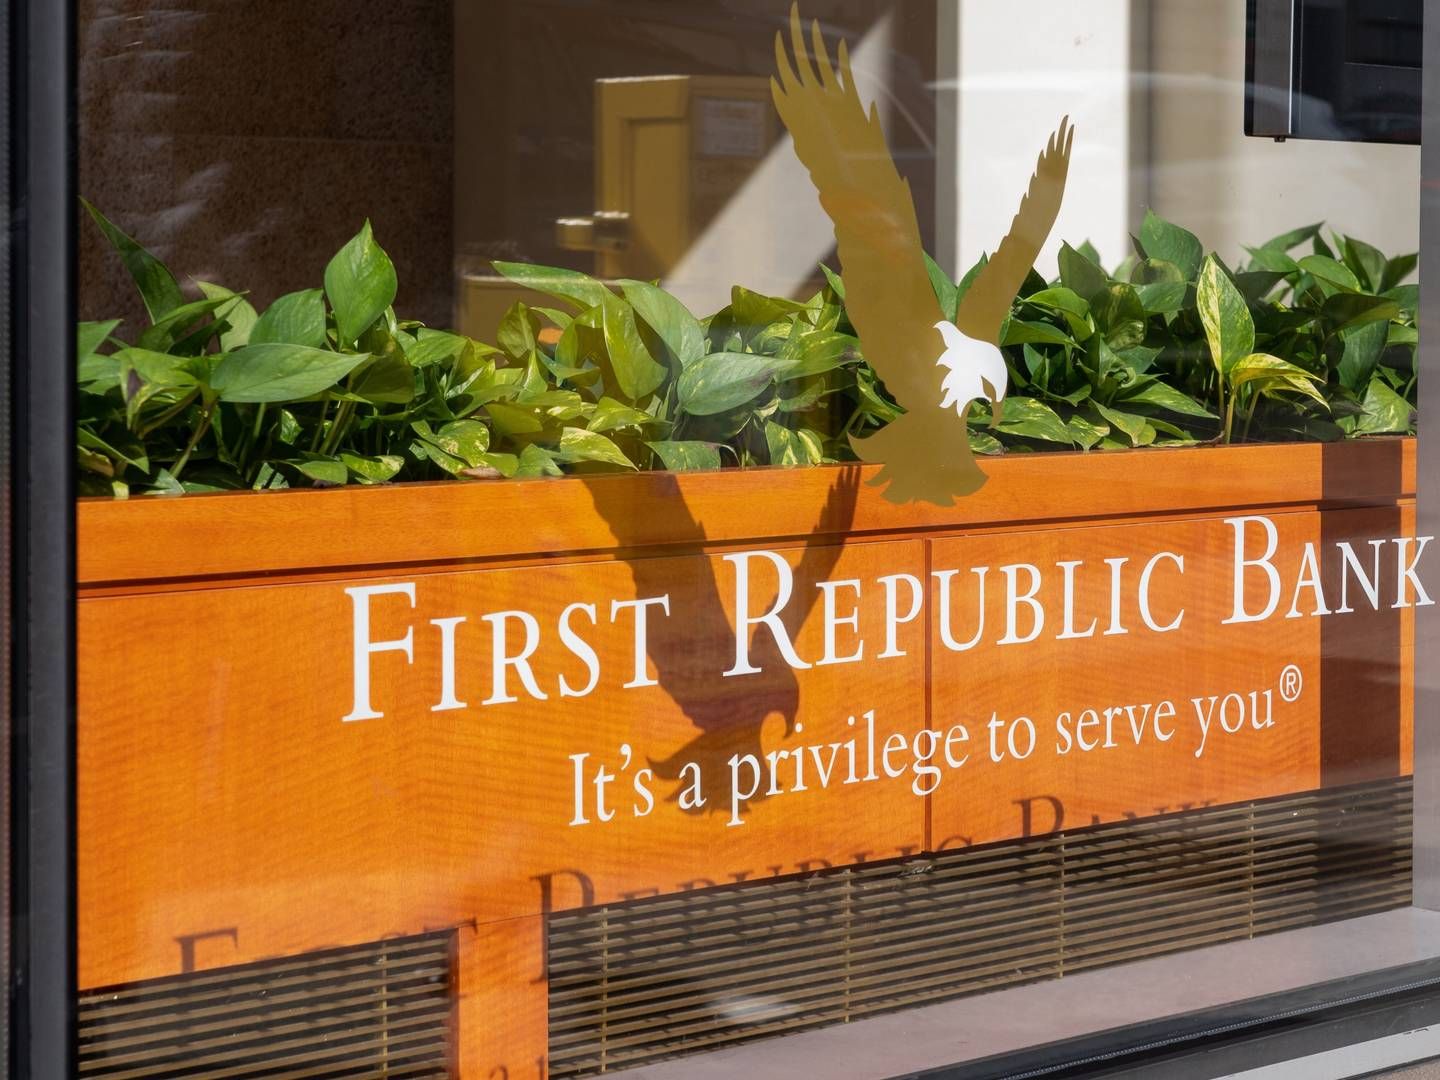 The eagle has landed: Filiale der First Republic Bank in New York. | Foto: picture alliance / ZUMAPRESS.com | M10s